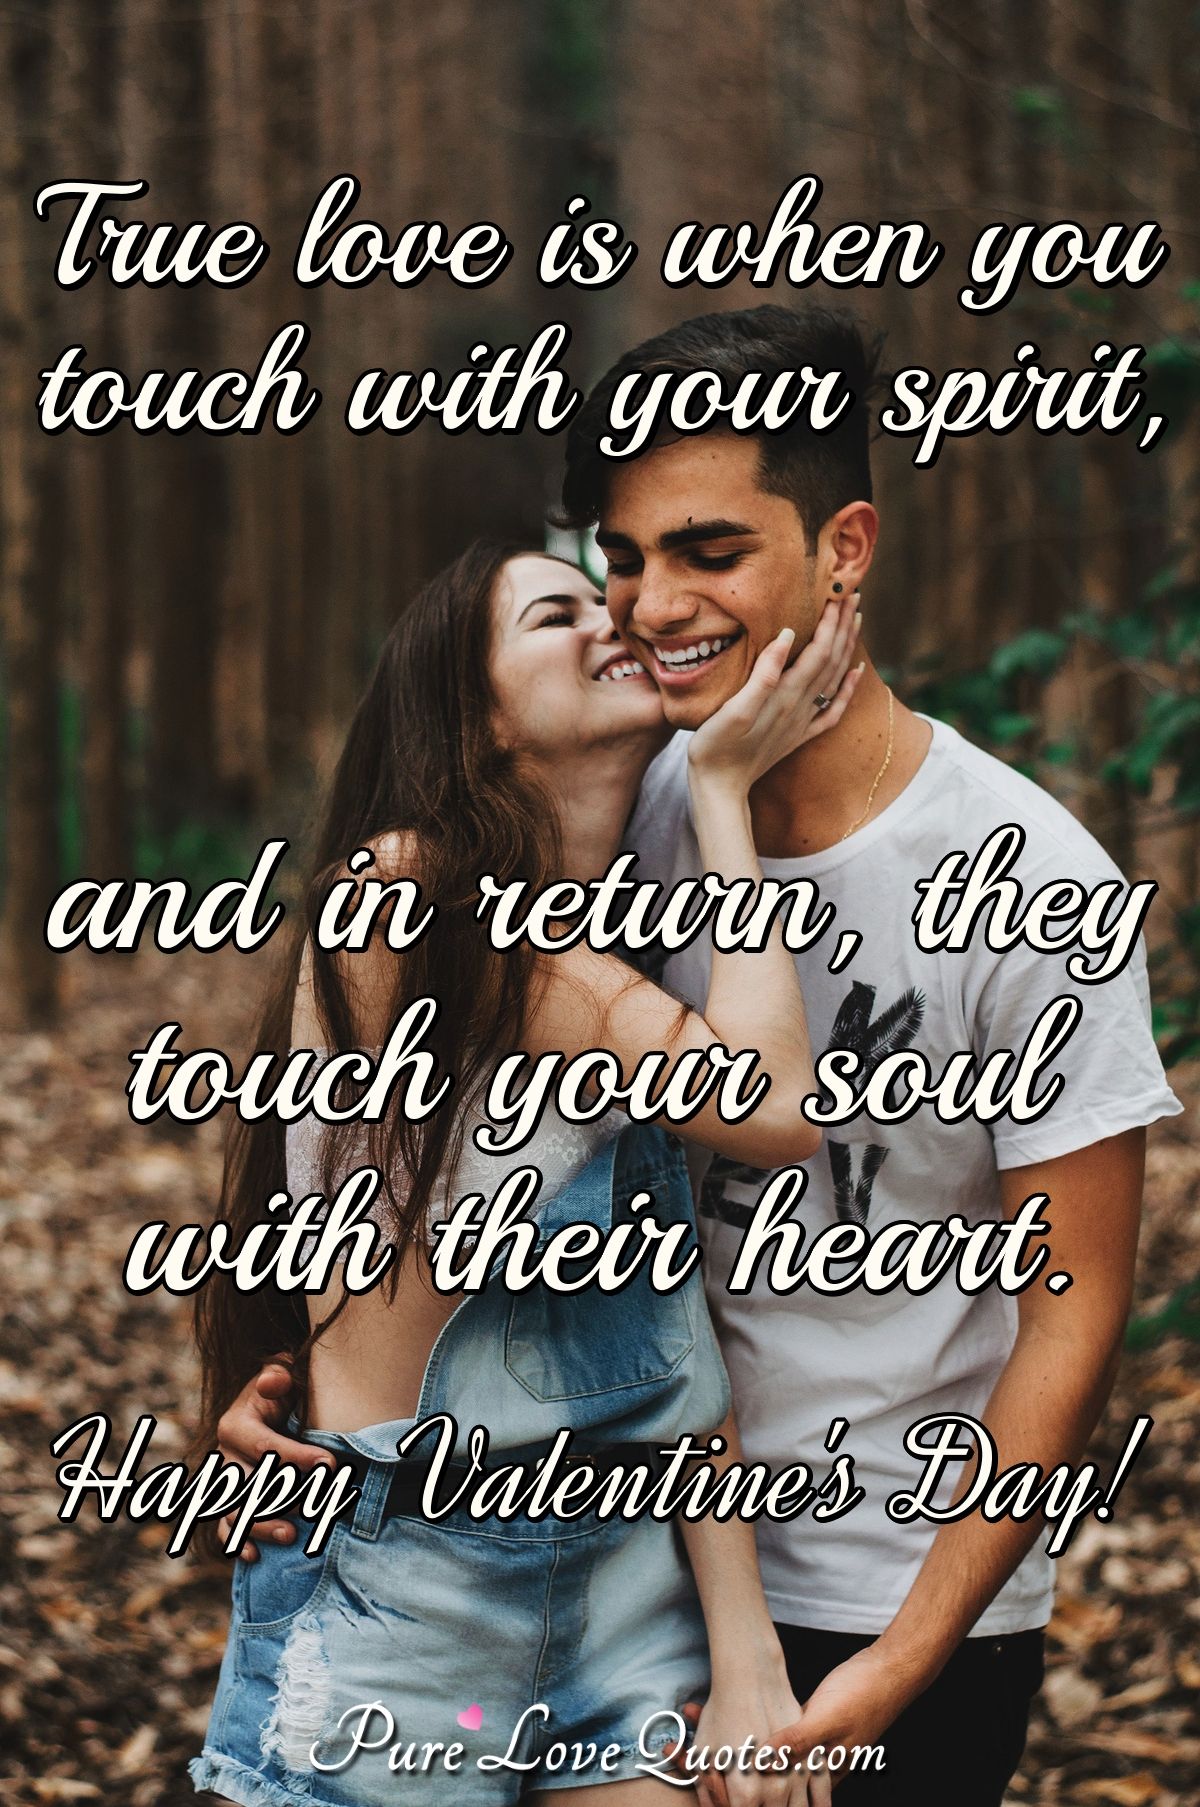 True love is when you touch with your spirit, and in return, they touch your soul with their heart.
Happy Valentine's Day! - Anonymous